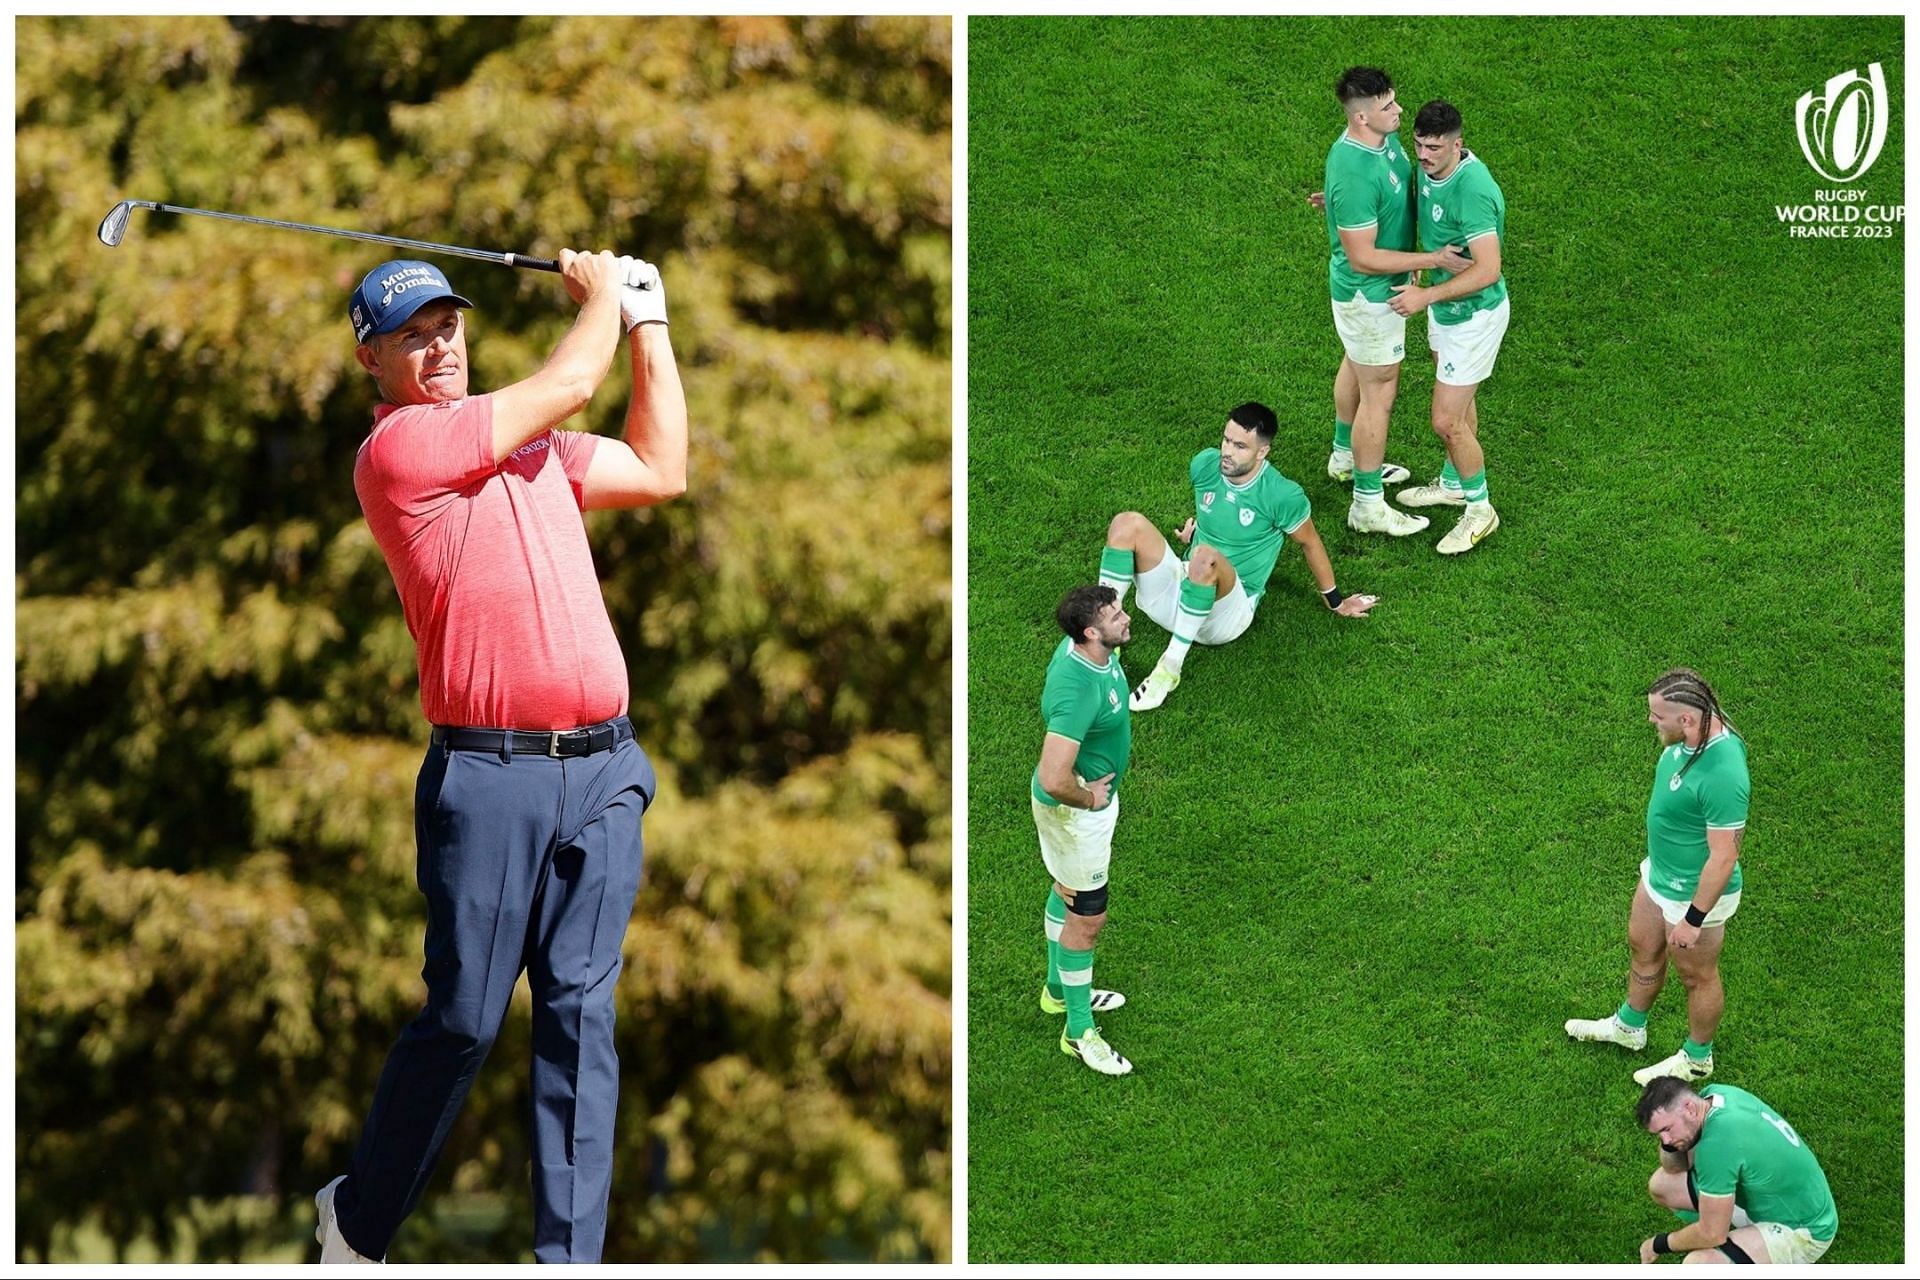 Padraig Harrington extended his support to the Irish Team after their defeat against New Zealand(Image 1 via Twitter.com/padraig_h, Image 2 via Rugby world Cup)